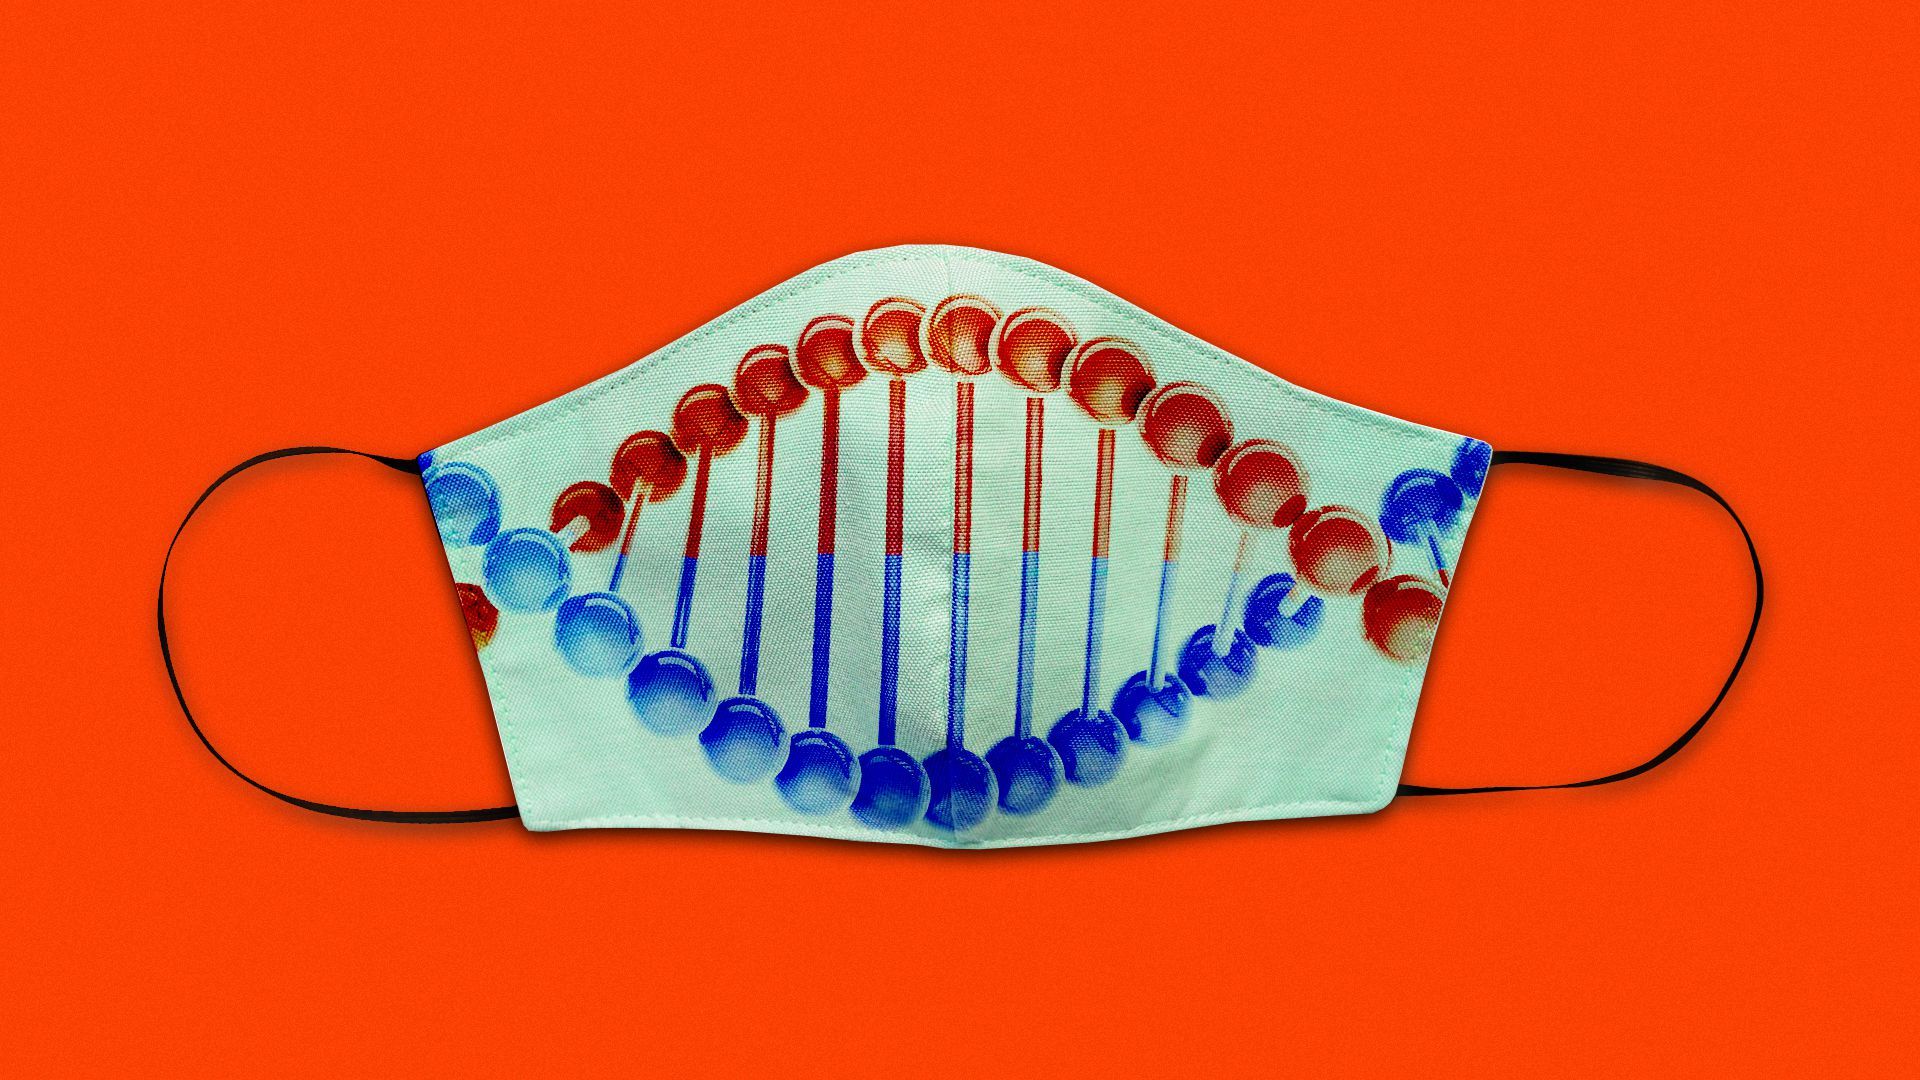 Illustration of a DNA helix on a face mask